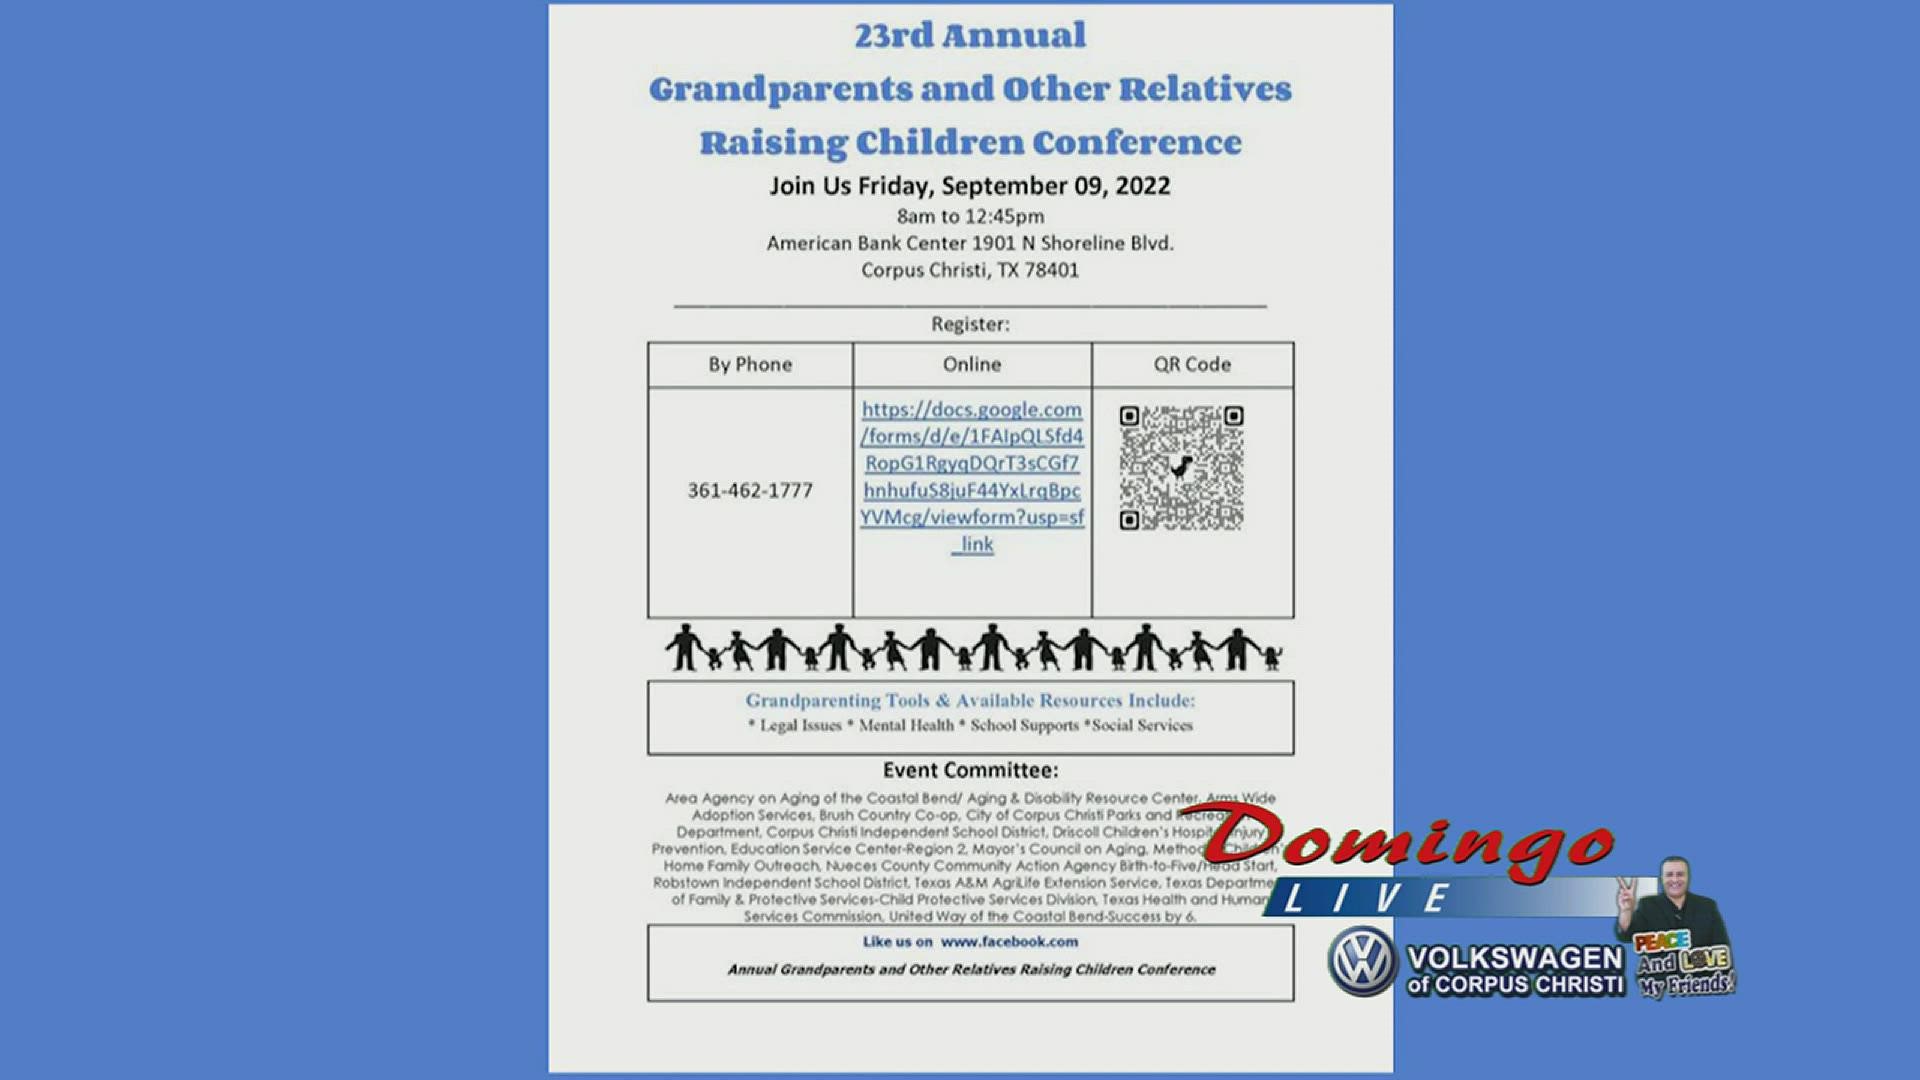 Domingo Live: Grandparents and Other Relatives Raising Children Conference